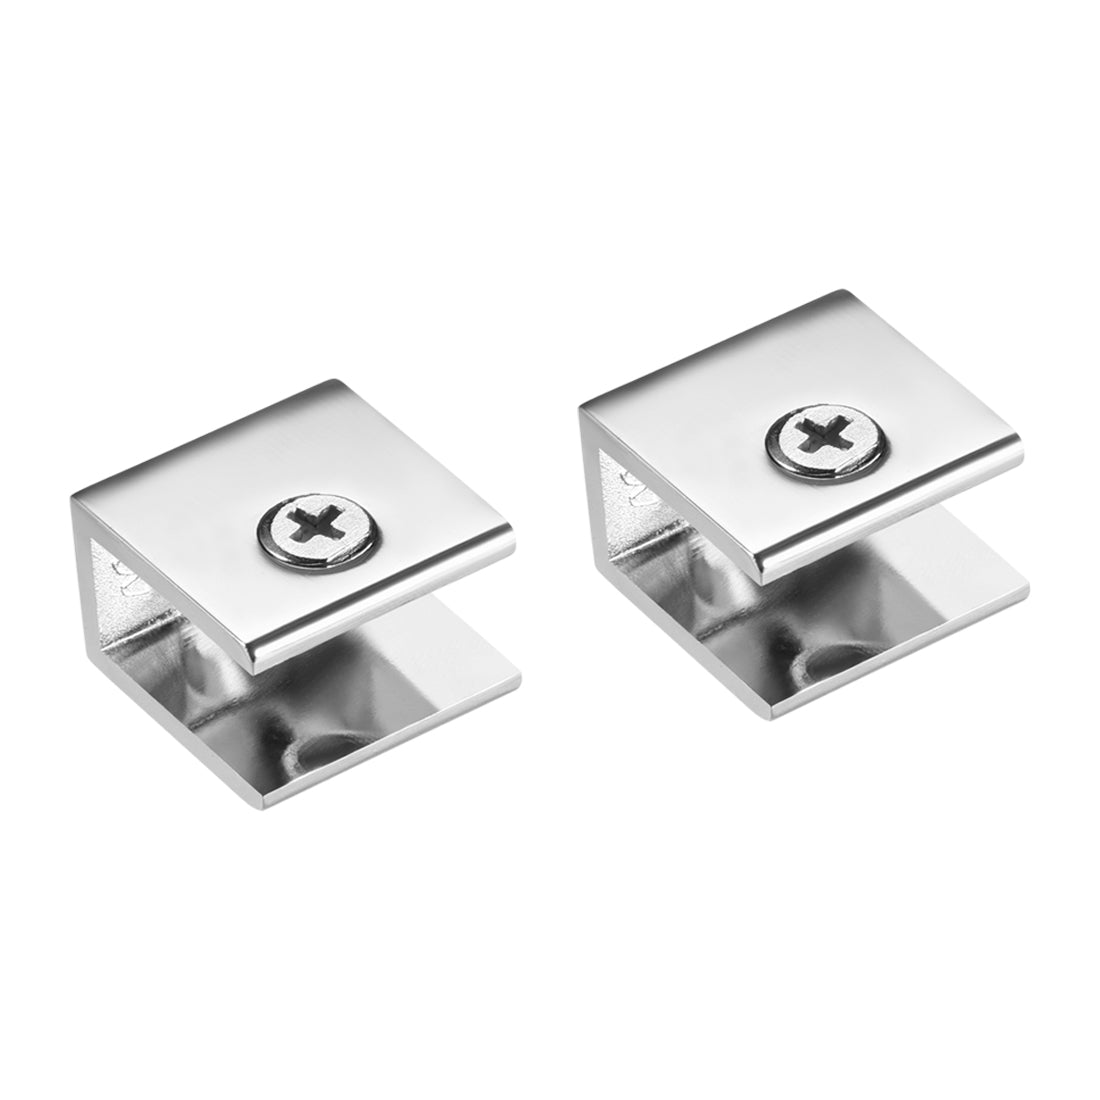 Uxcell Uxcell Glass Shelf Brackets Zinc Alloy Clip Square for 10-12mm Thickness 2pcs